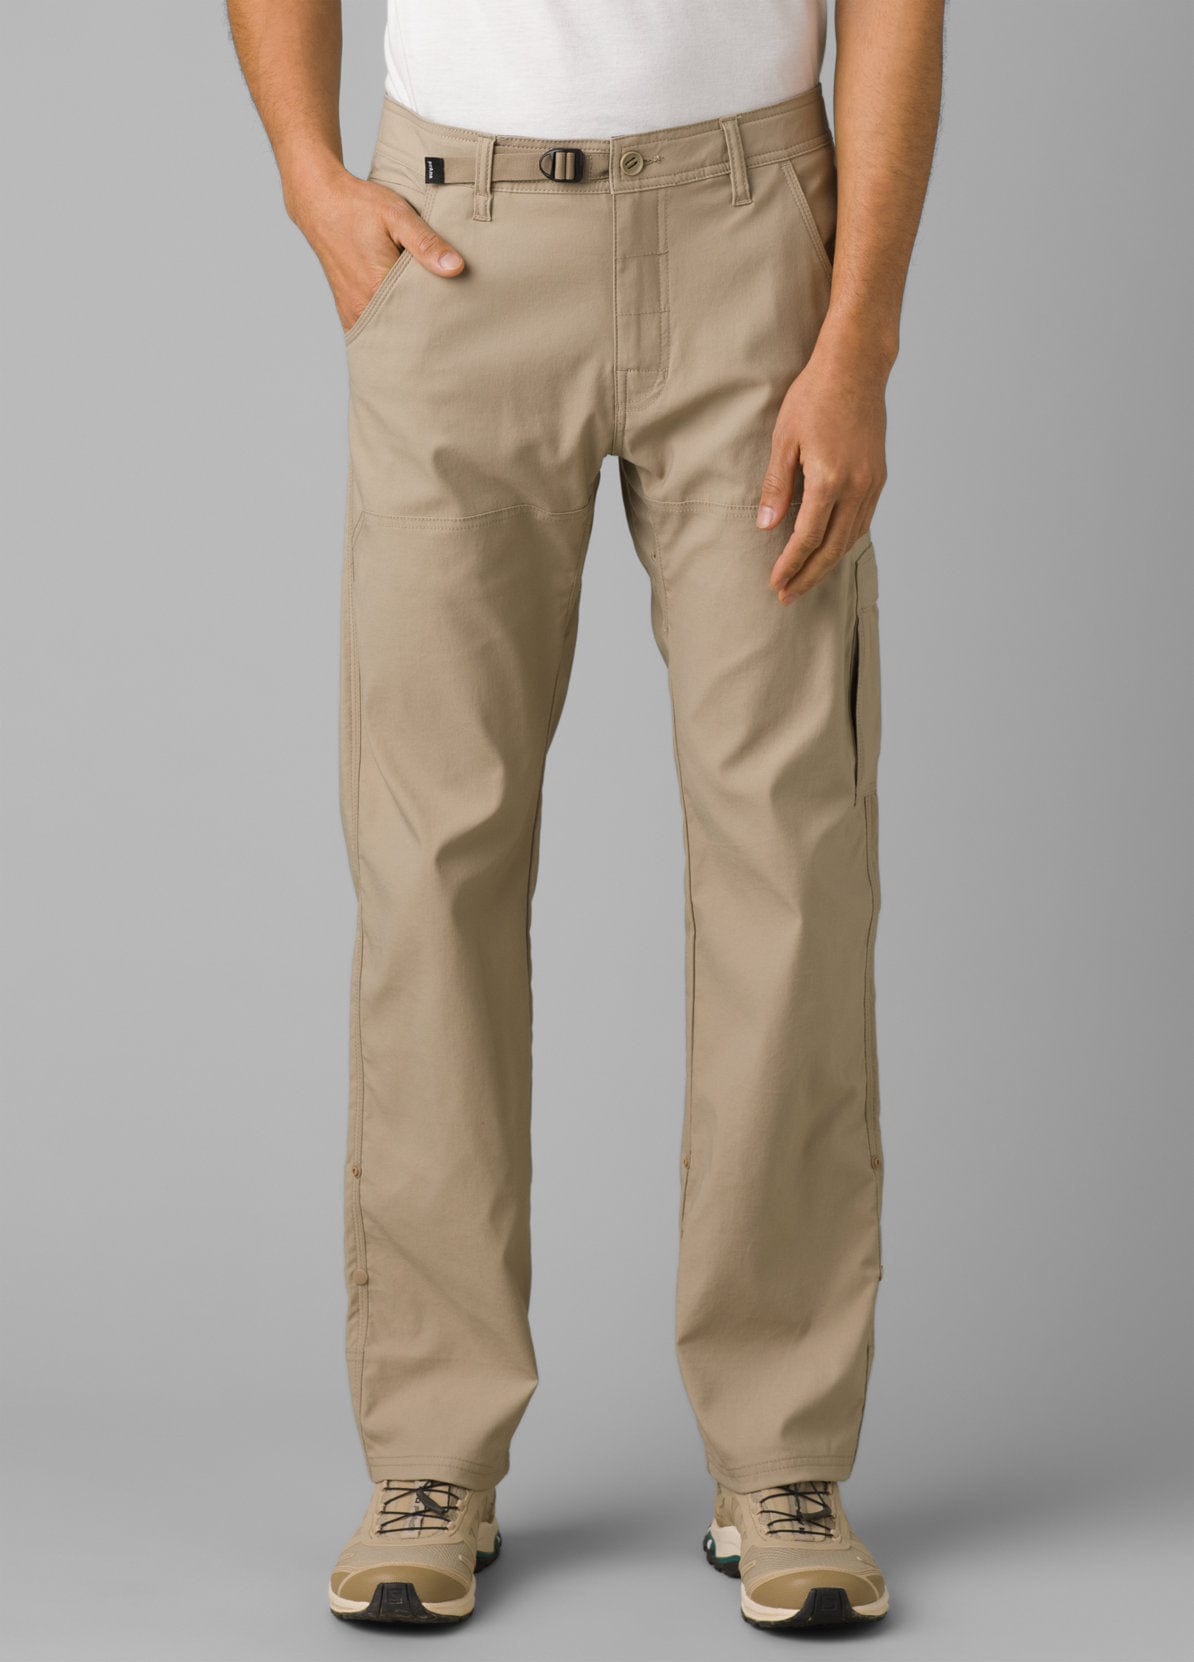 prAna Stretch Zion Pant - Men's, Mud, 36 Waist, Long — Mens Waist Size: 36  in, Inseam Size: Long, Gender: Male, Age Group: Adults — M4ST34116-MUD-36